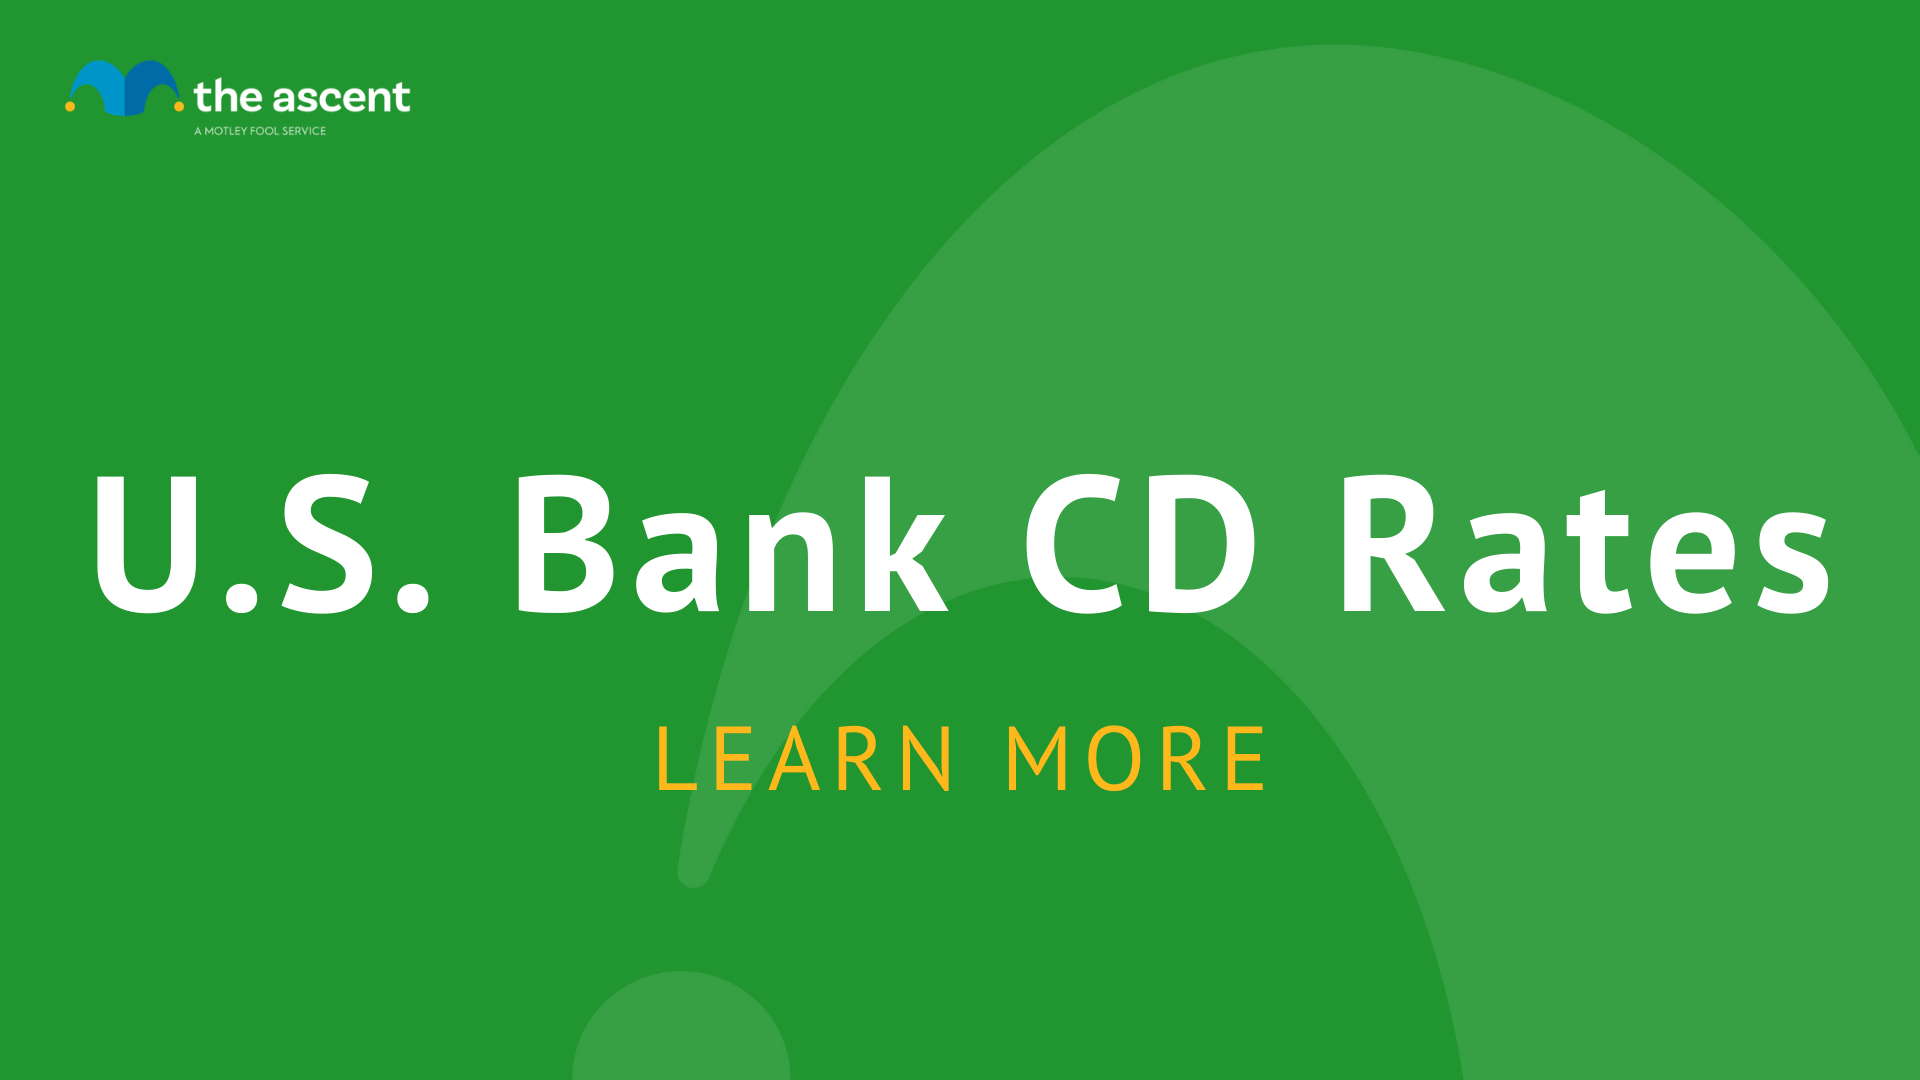 U.S. Bank CD Rates for February 2023